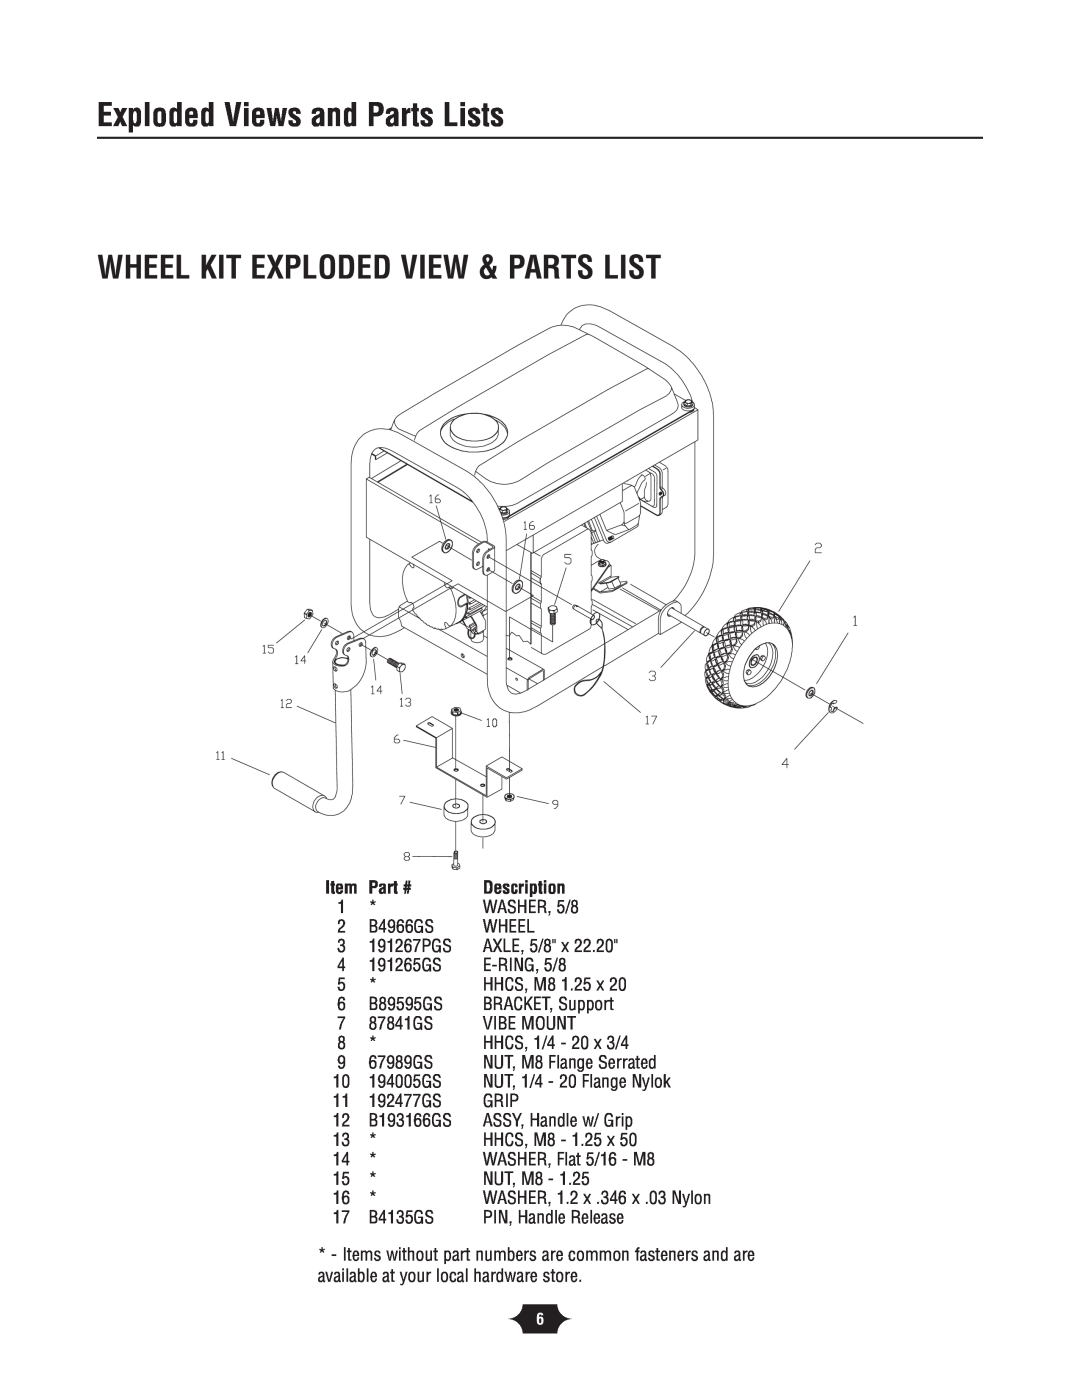 Briggs & Stratton 30342 manual Wheel Kit Exploded View & Parts List, Exploded Views and Parts Lists, Description 